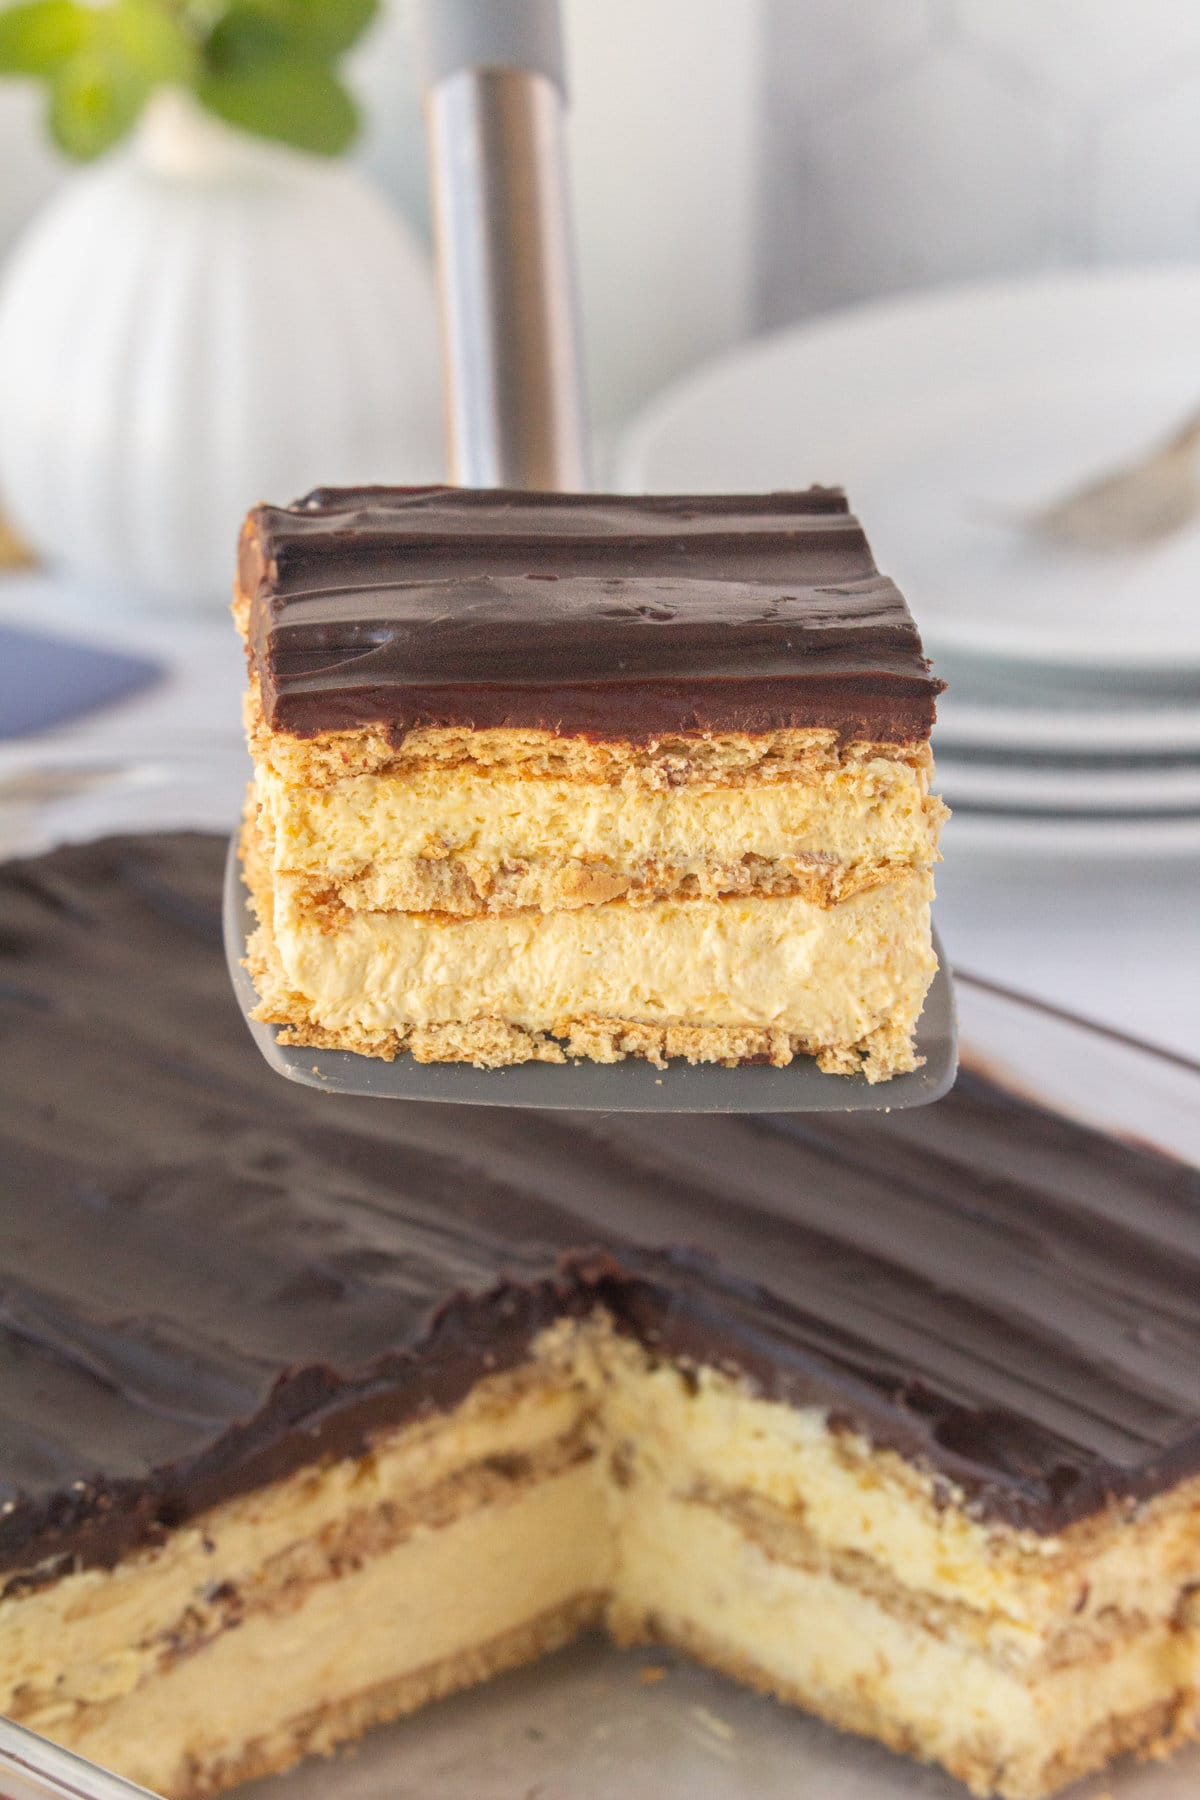 A slice of eclair cake being lifted out of the pan.